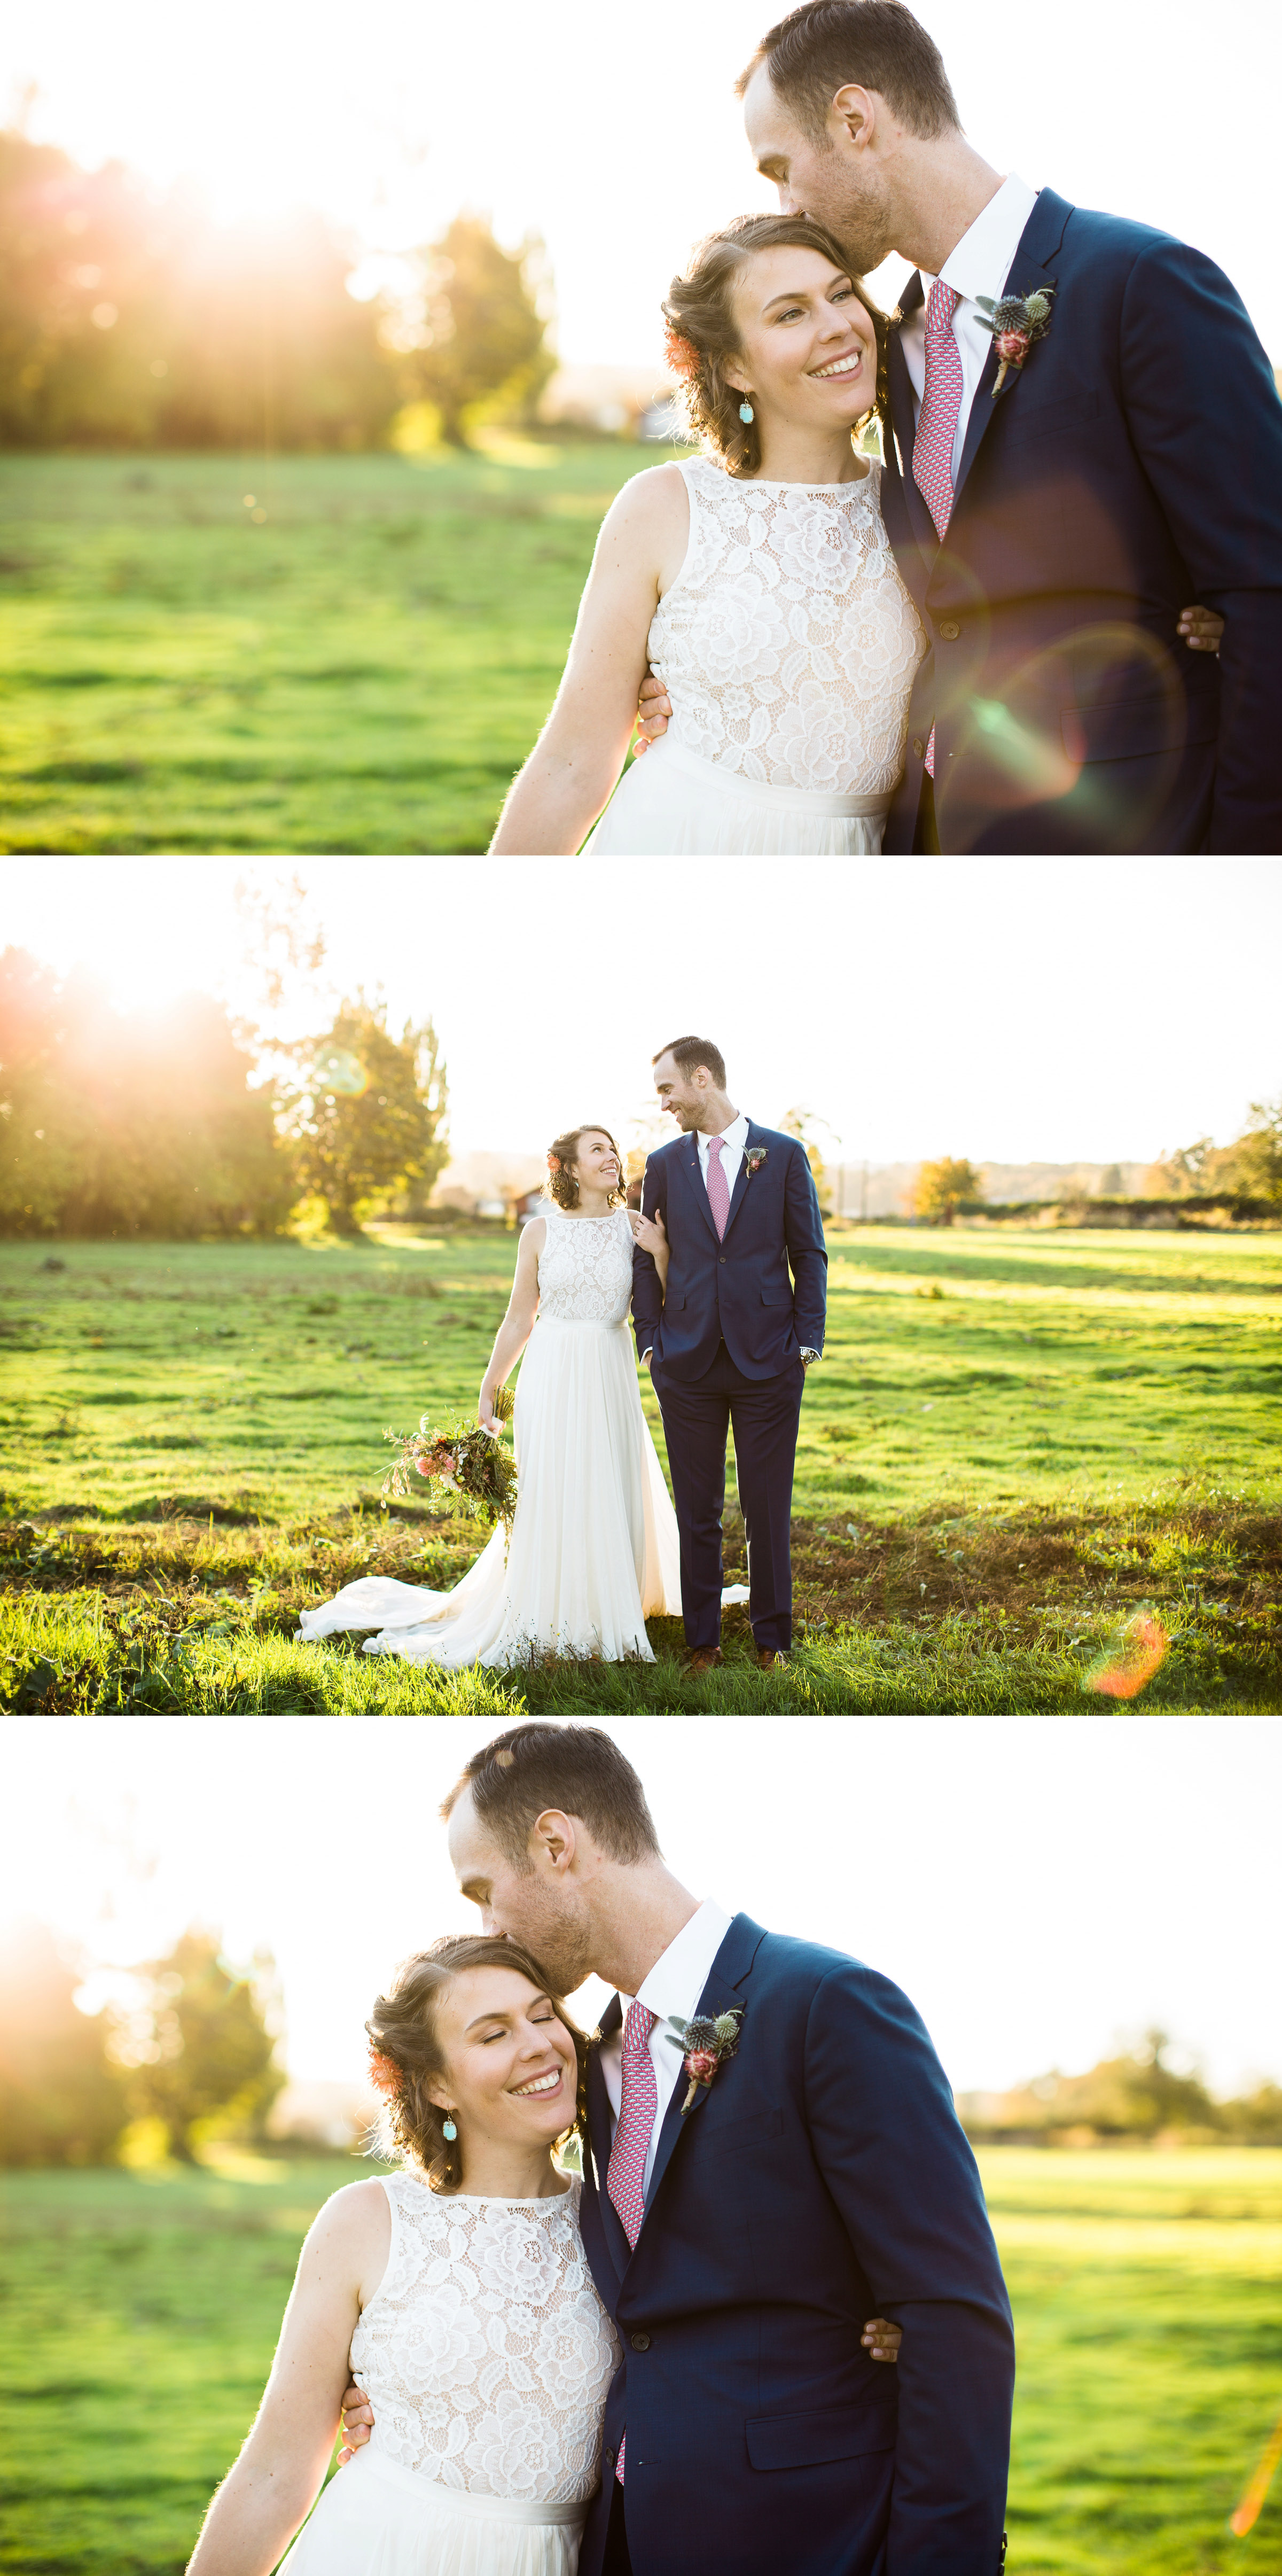 23-the-Fields-at-Willie-Greens-Wedding-Venue-Seattle-Photographer-bride-groom-sunset-portraits-Photography